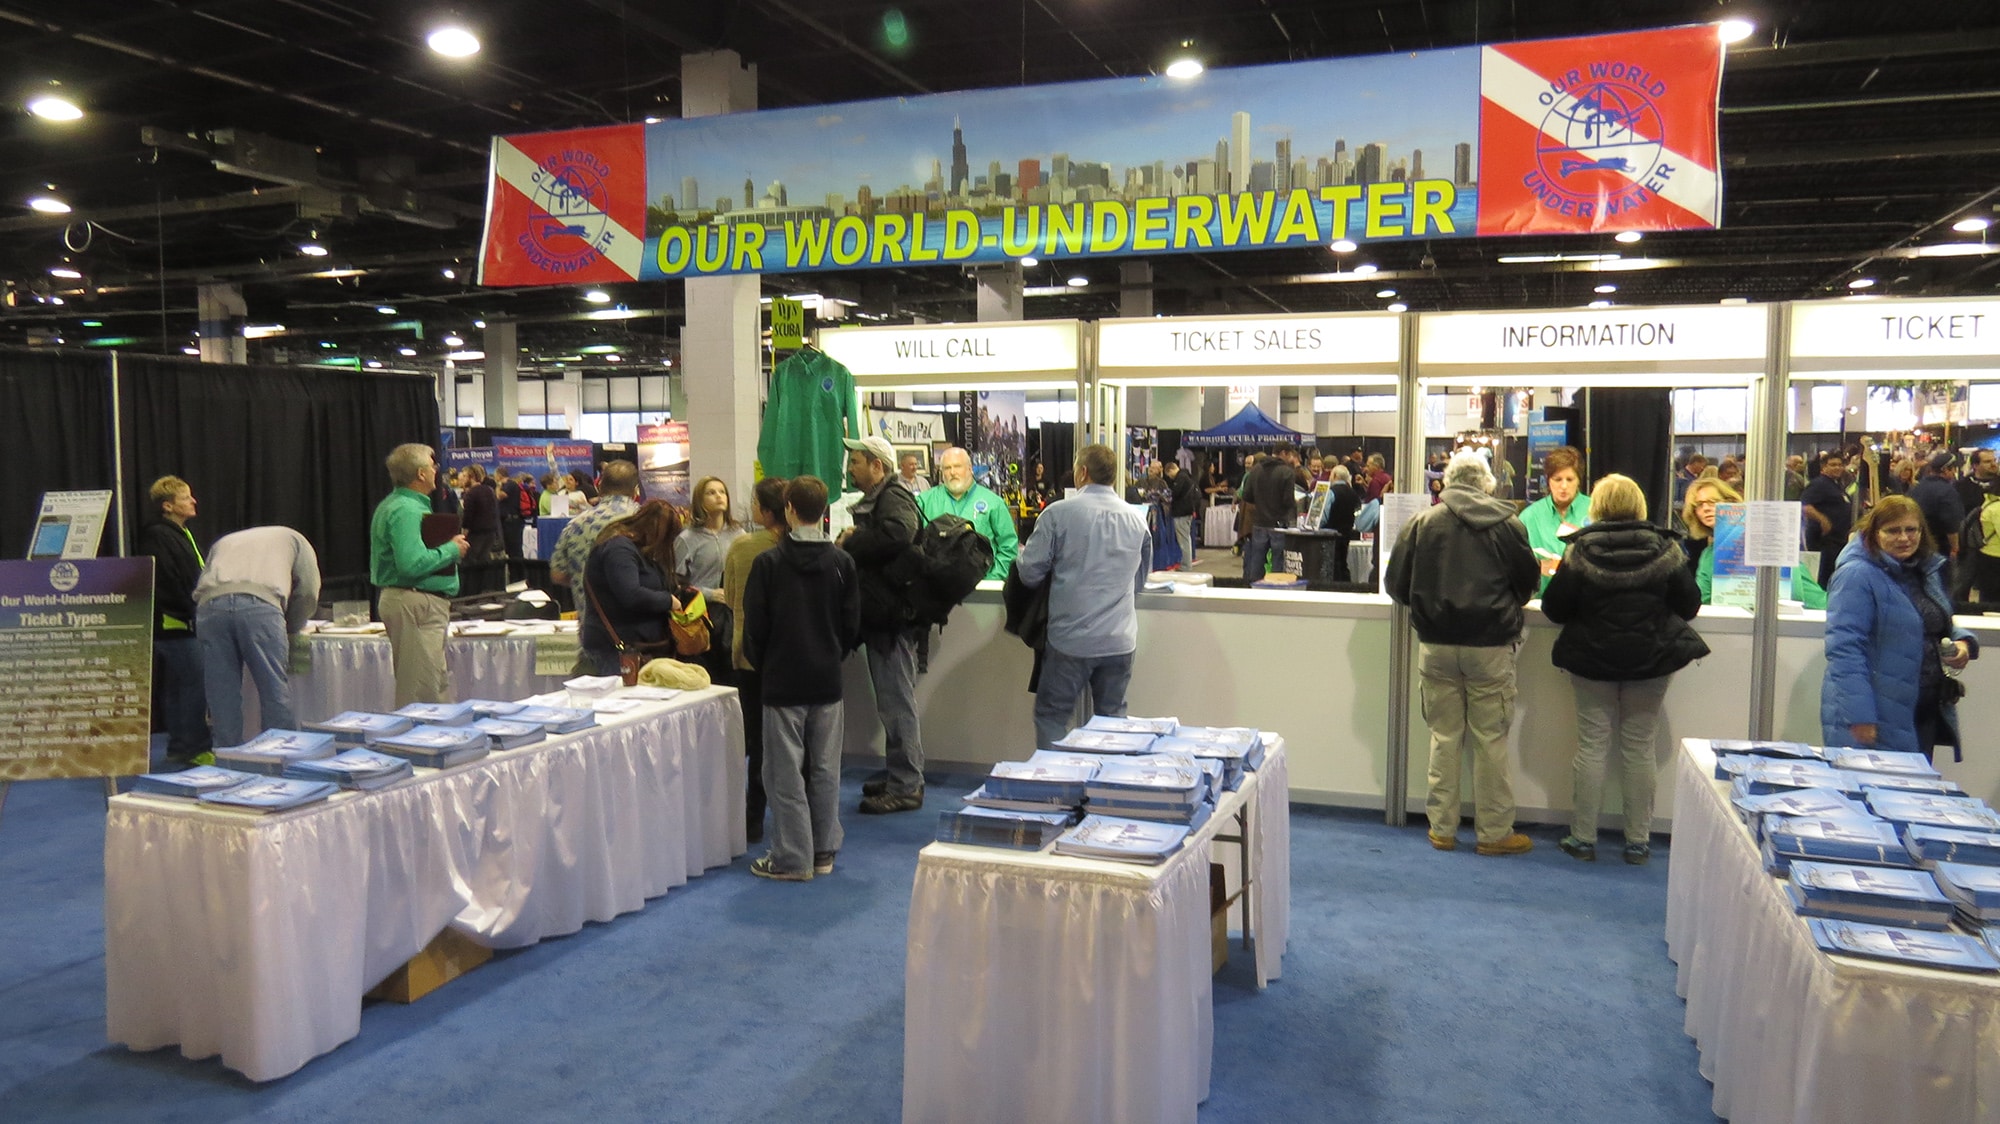 Best Dive Shows In The World - Our World Underwater Chicago Dive & Travel Expo